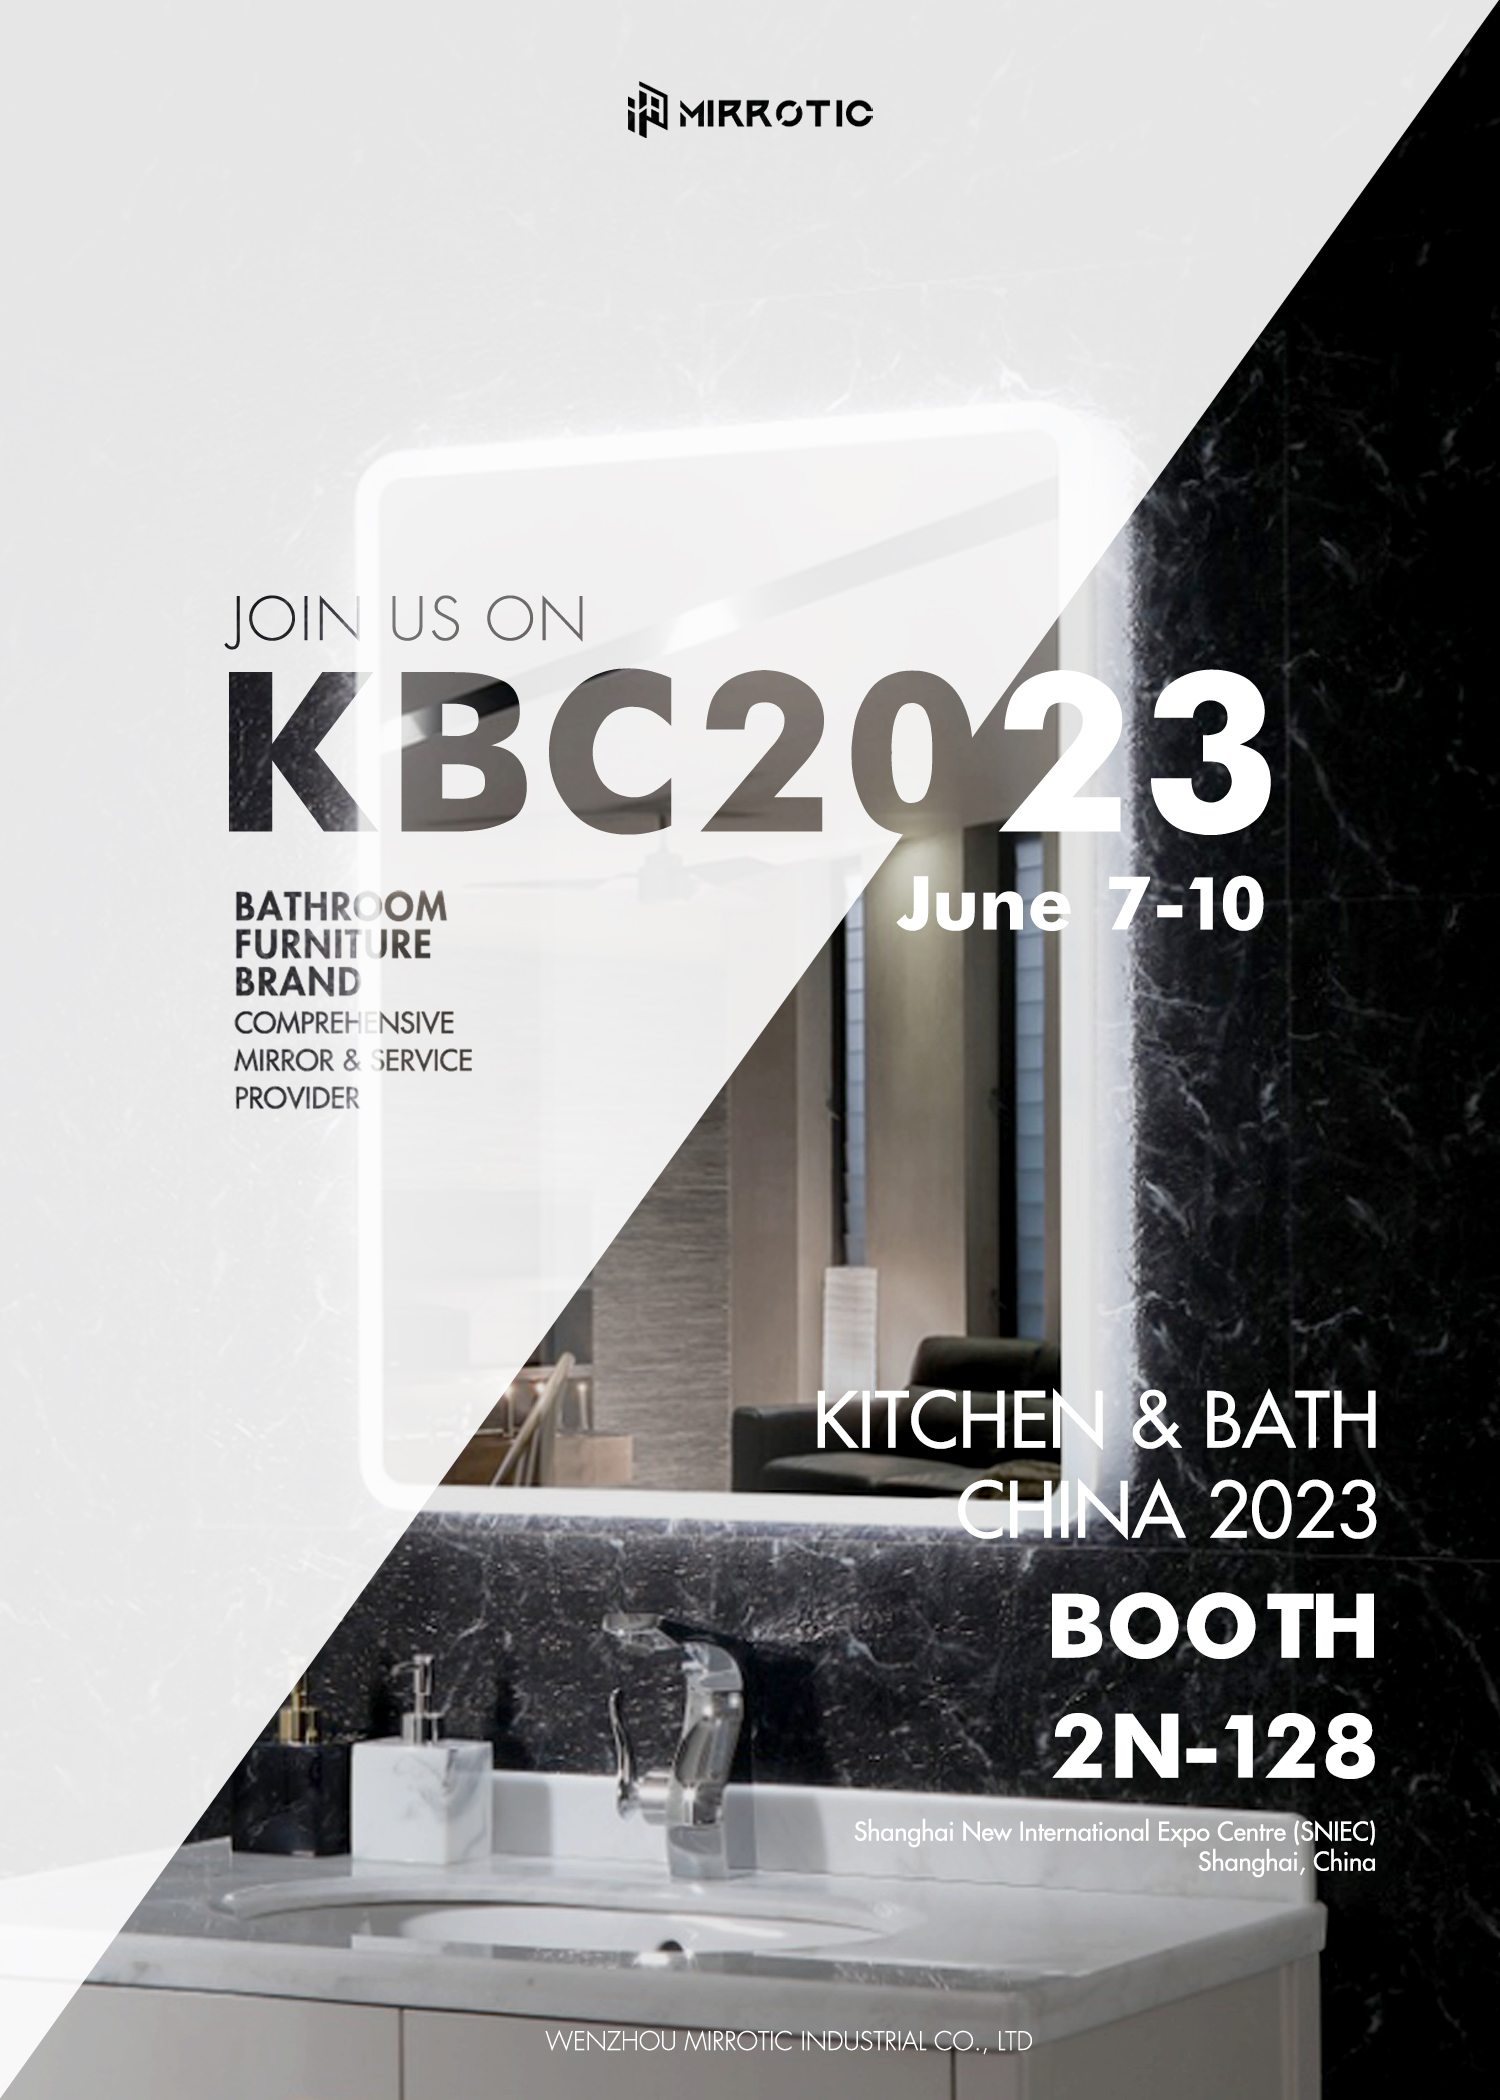 KBC2023 Expo is Now Open, and We Invite You to Visit Our Booth!